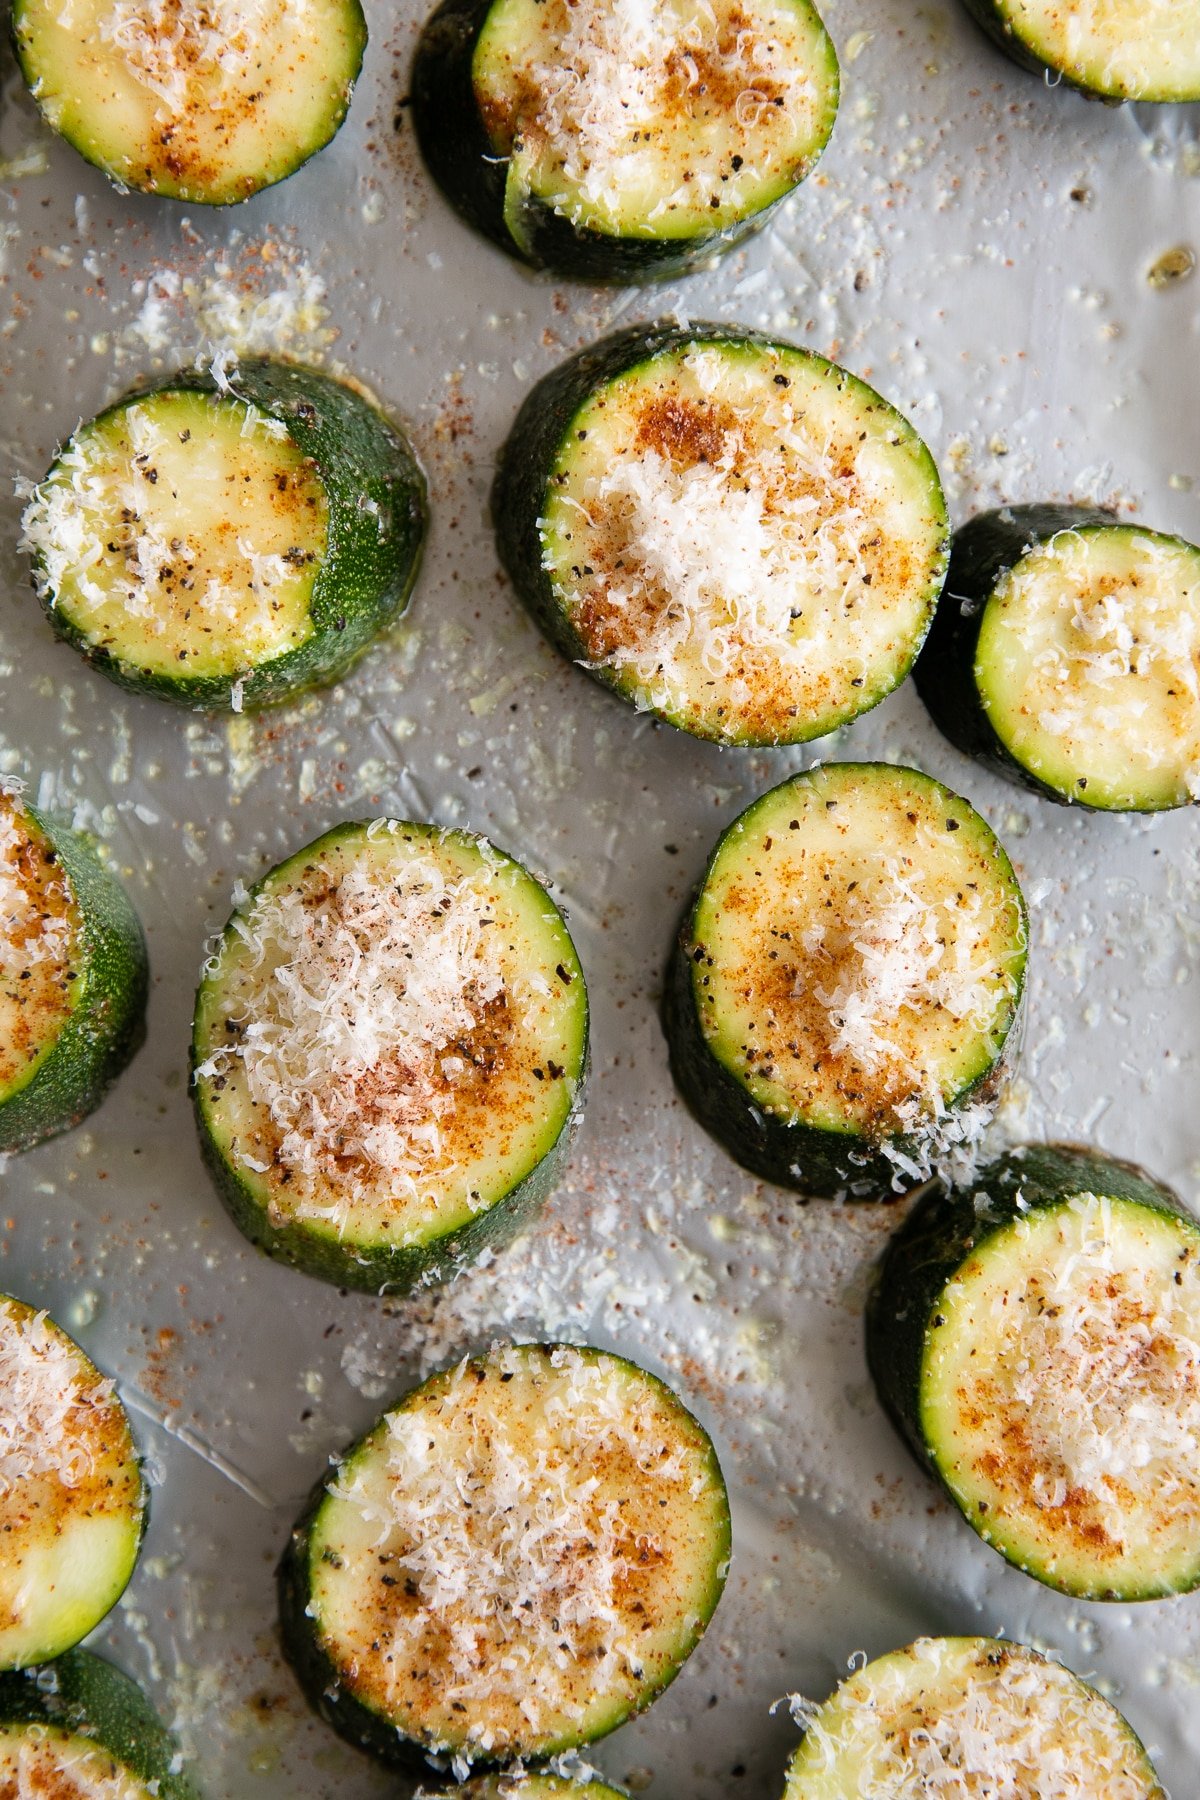 Zucchini slices on a baking sheet seasoned with salt, pepper, paprika, garlic, and topped with grated parmesan cheese.